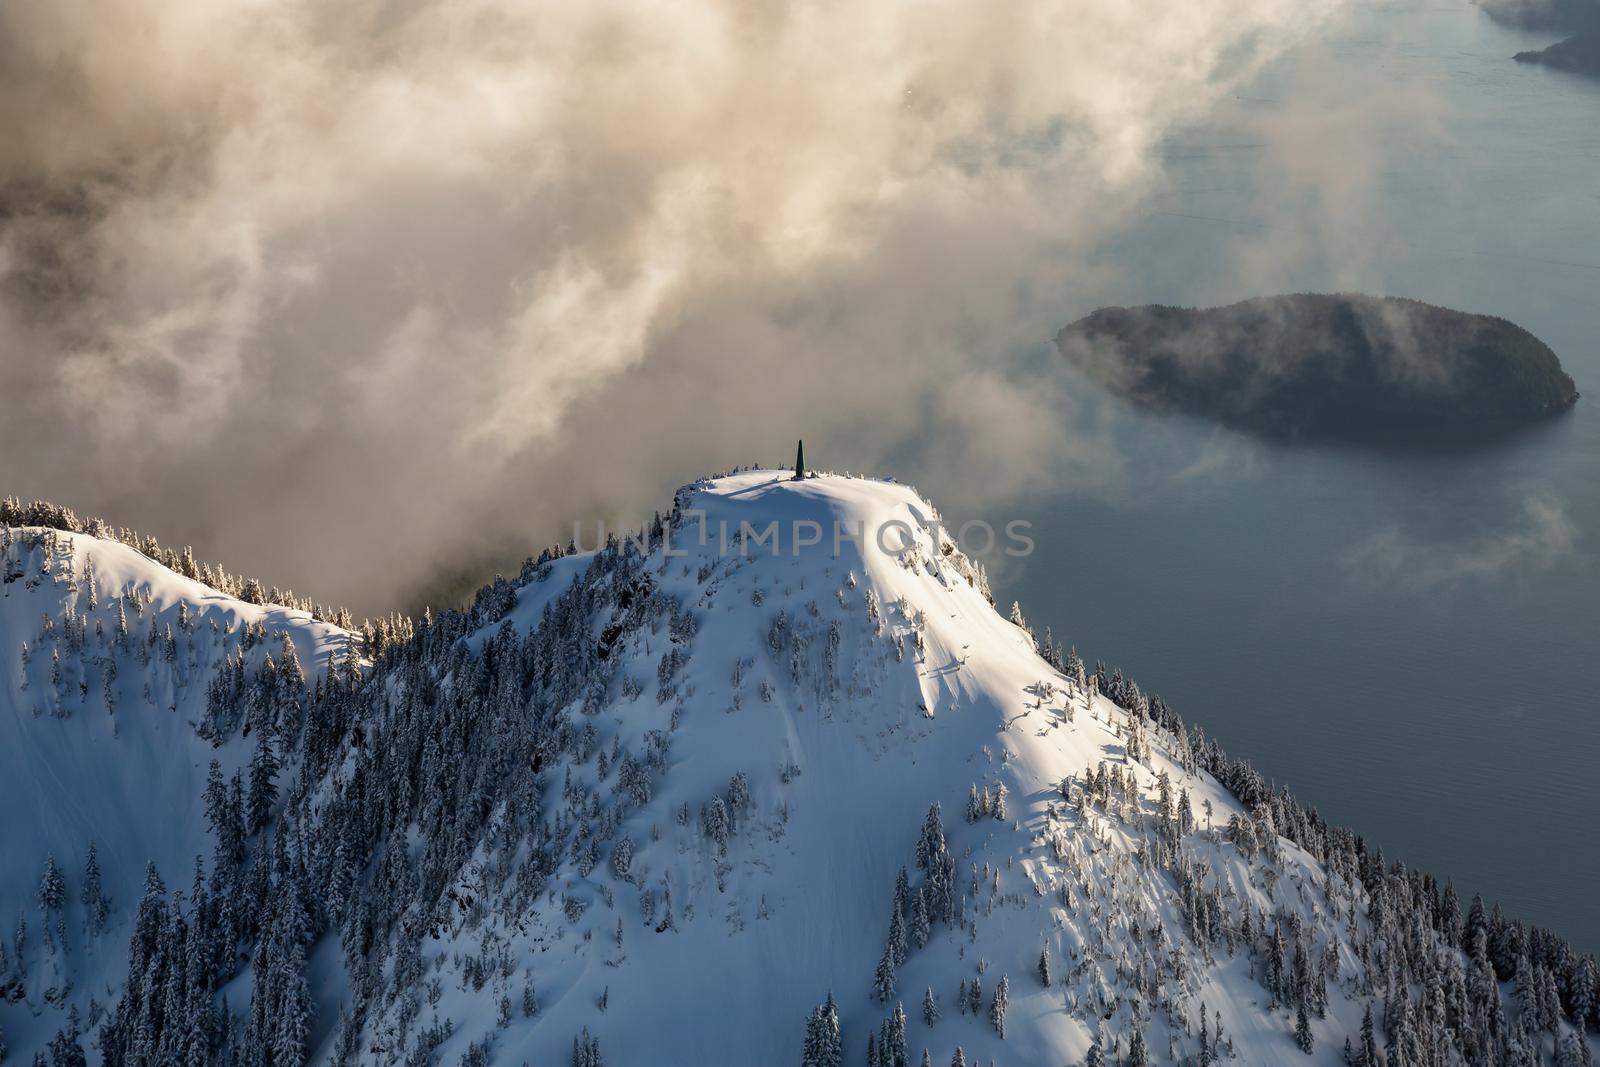 Communication beacon on top of the snowy mountain. Picture taken near Howe Sound, North of Vancouver, BC, Canada.